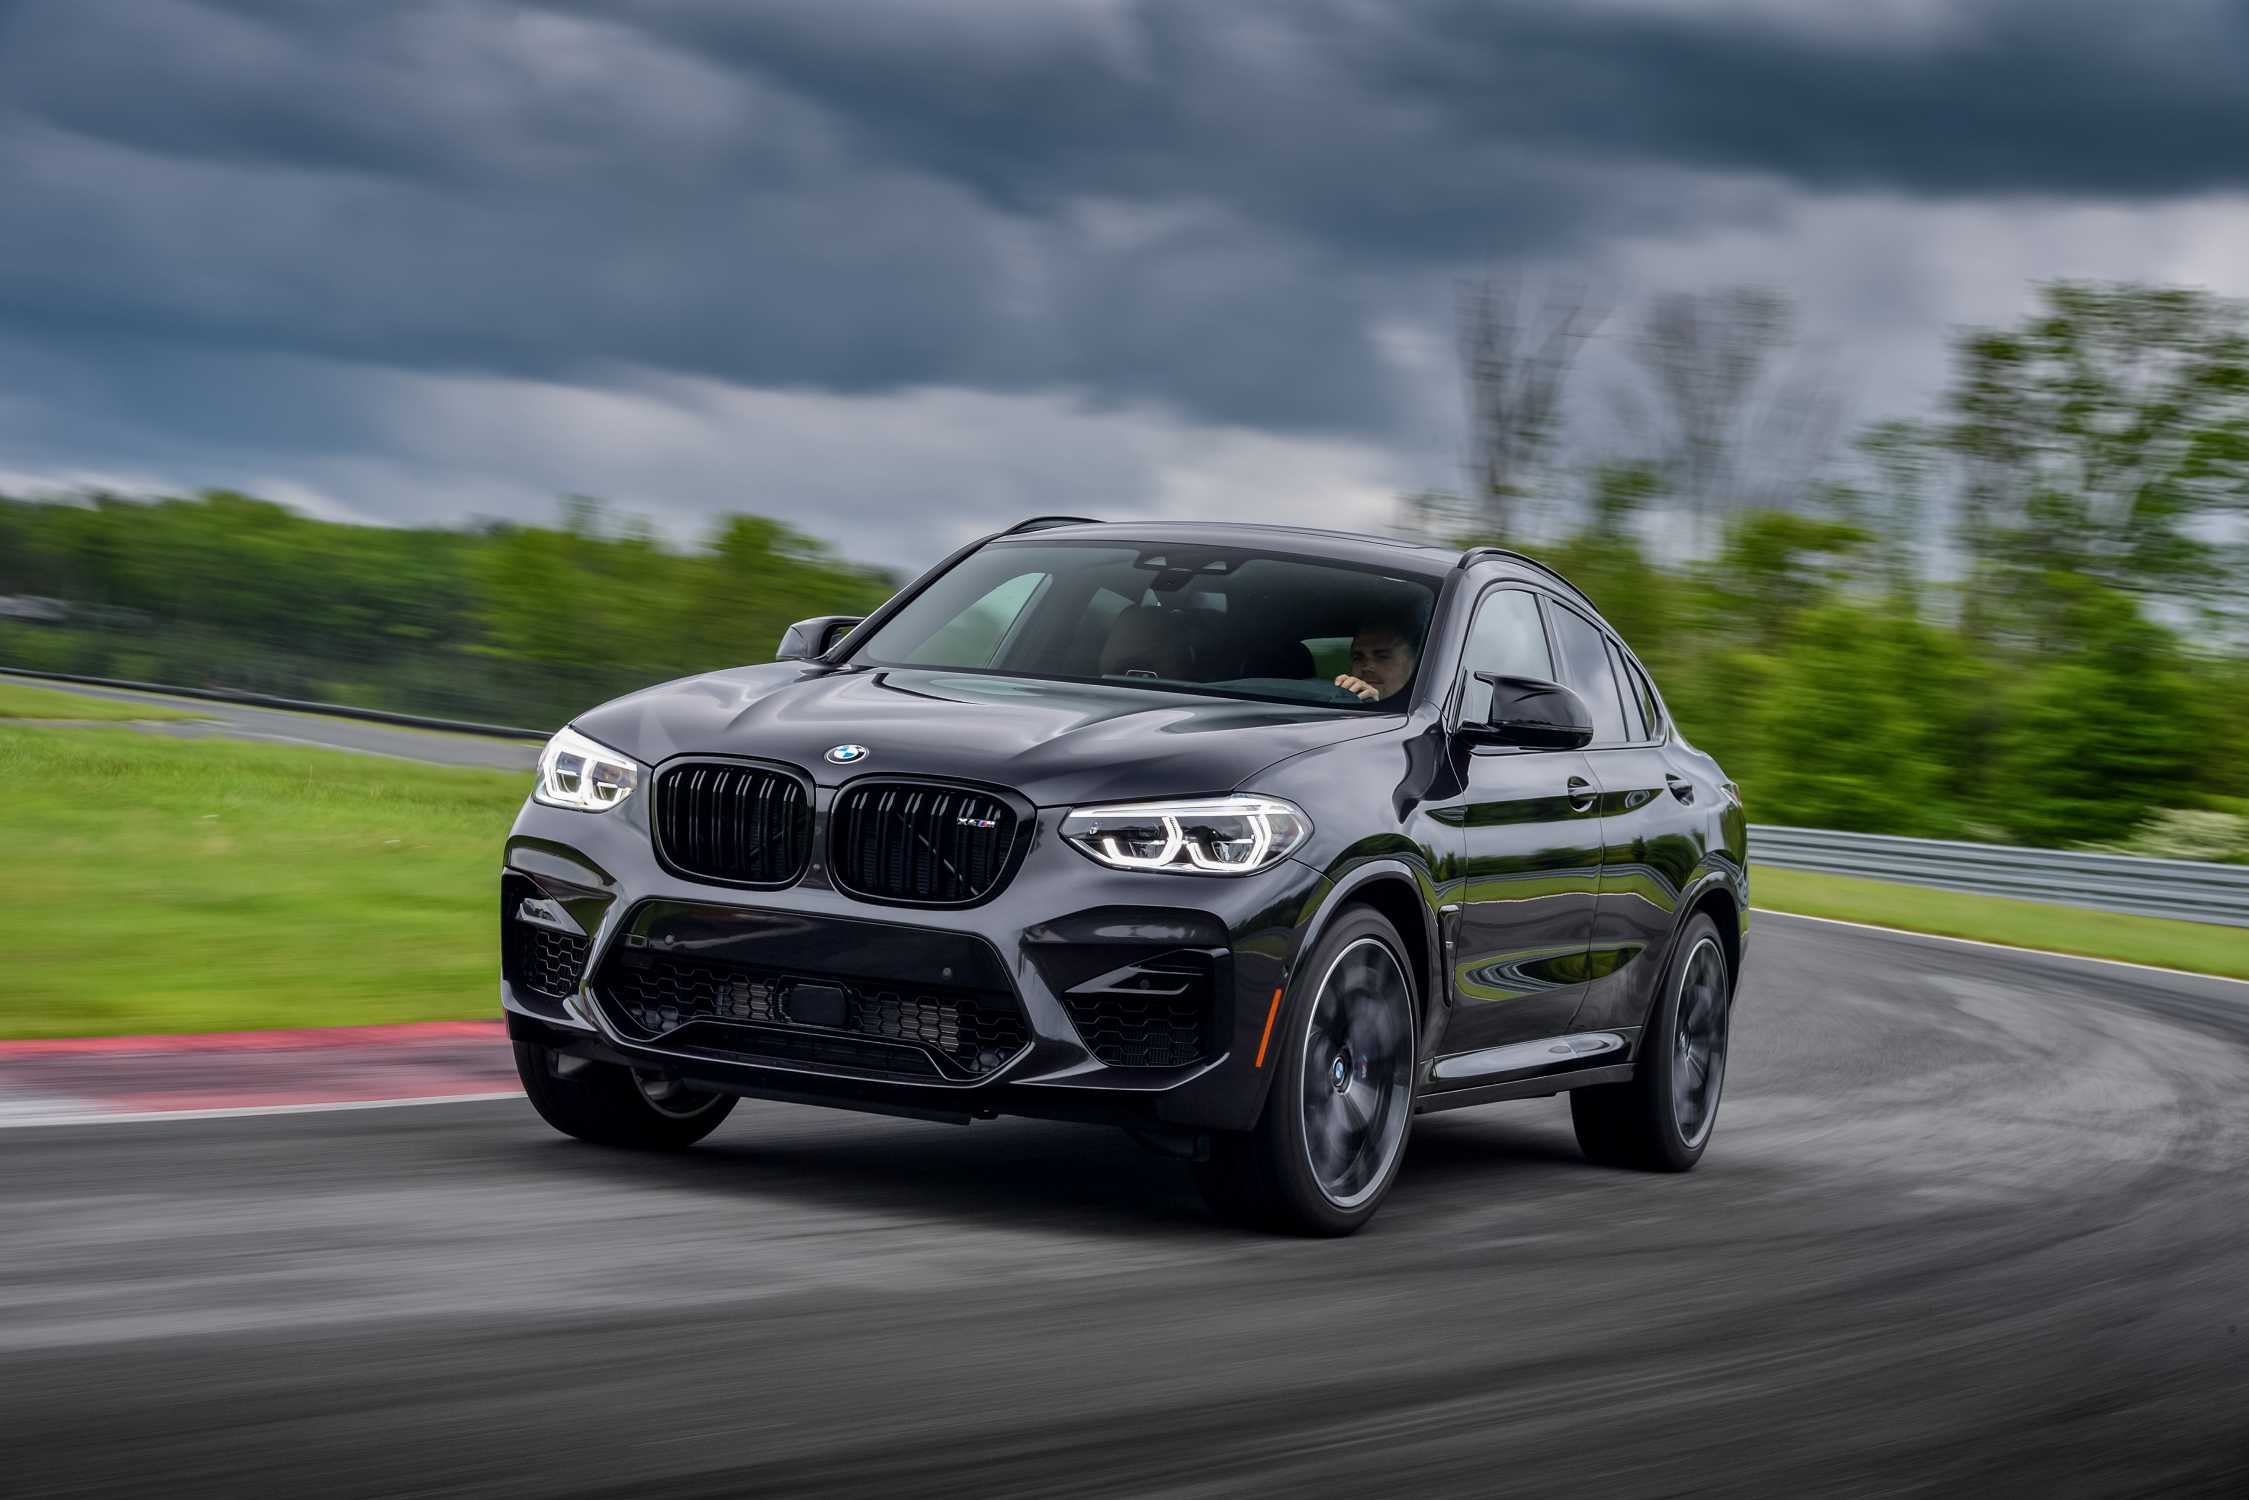 The all-new BMW X3 M and the all-new BMW X4 M - Additional pictures.